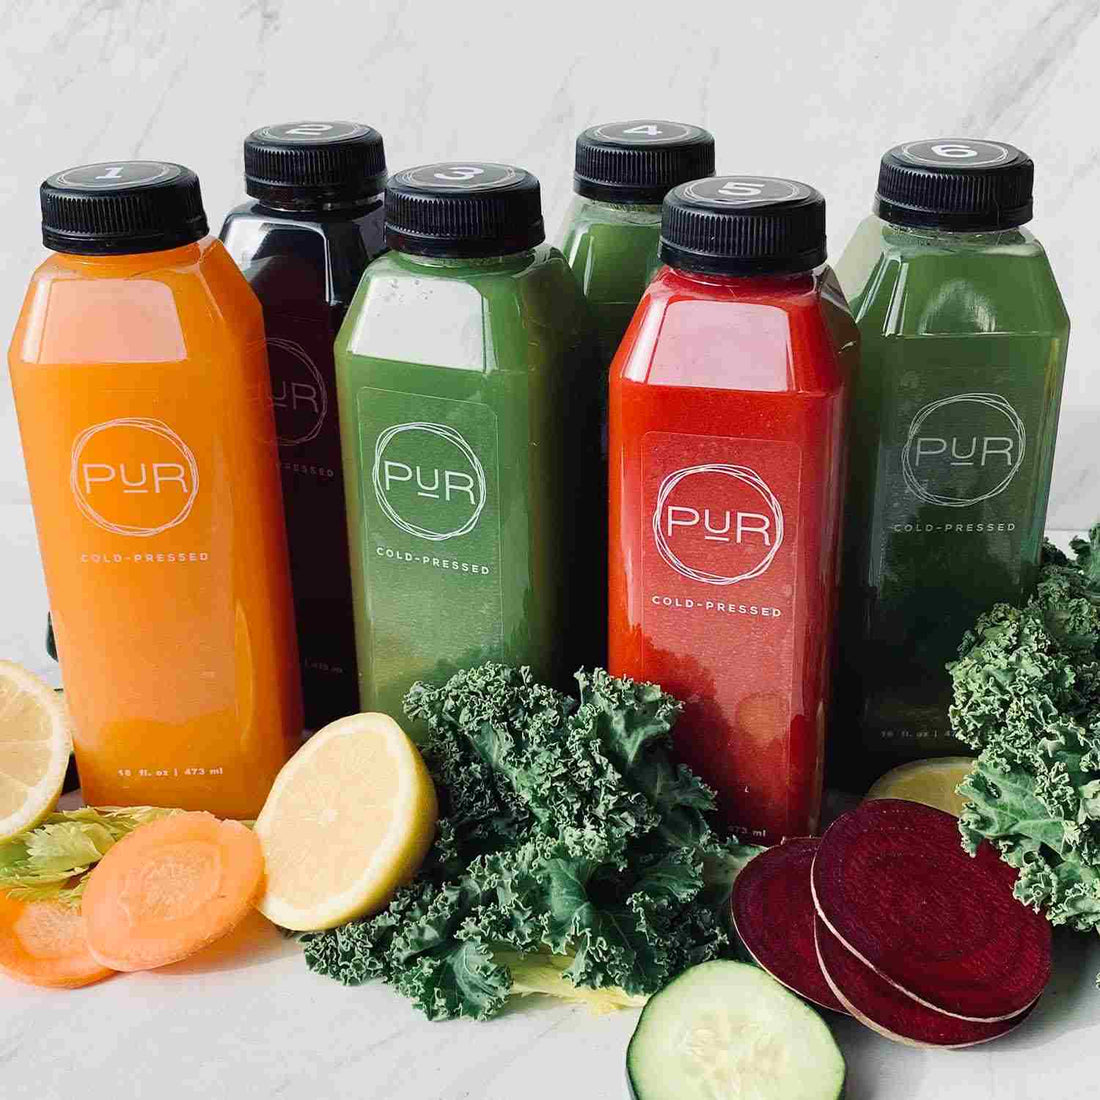 Frequently Asked Questions About Juice Cleanses Answered - PUR Cold Pressed Juice